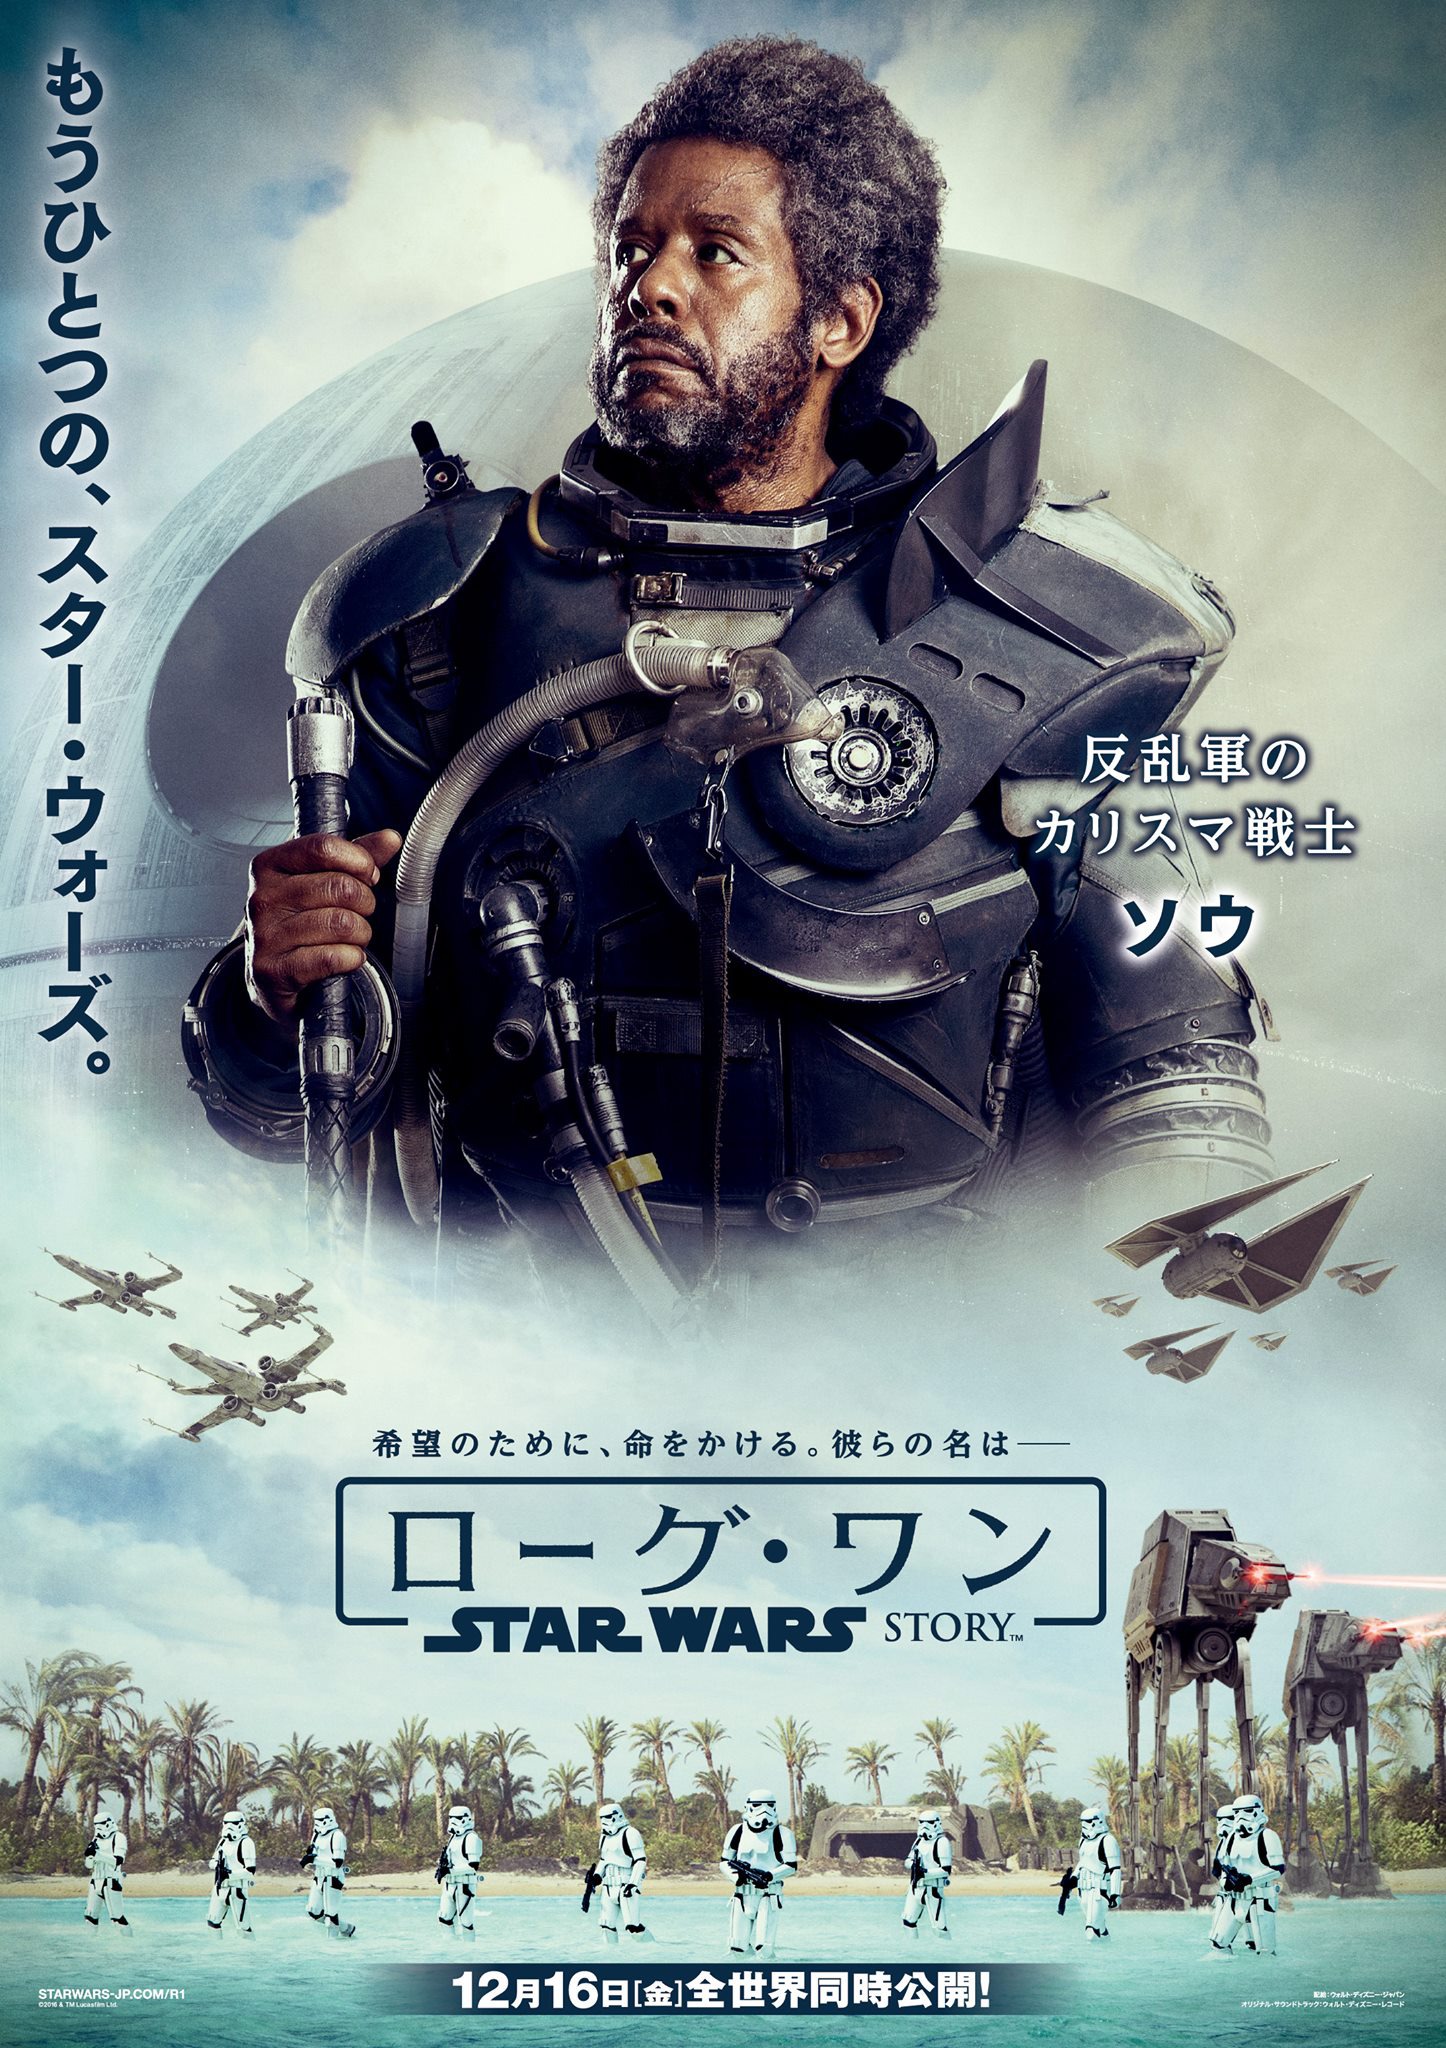 Mega Sized Movie Poster Image for Rogue One: A Star Wars Story (#26 of 47)